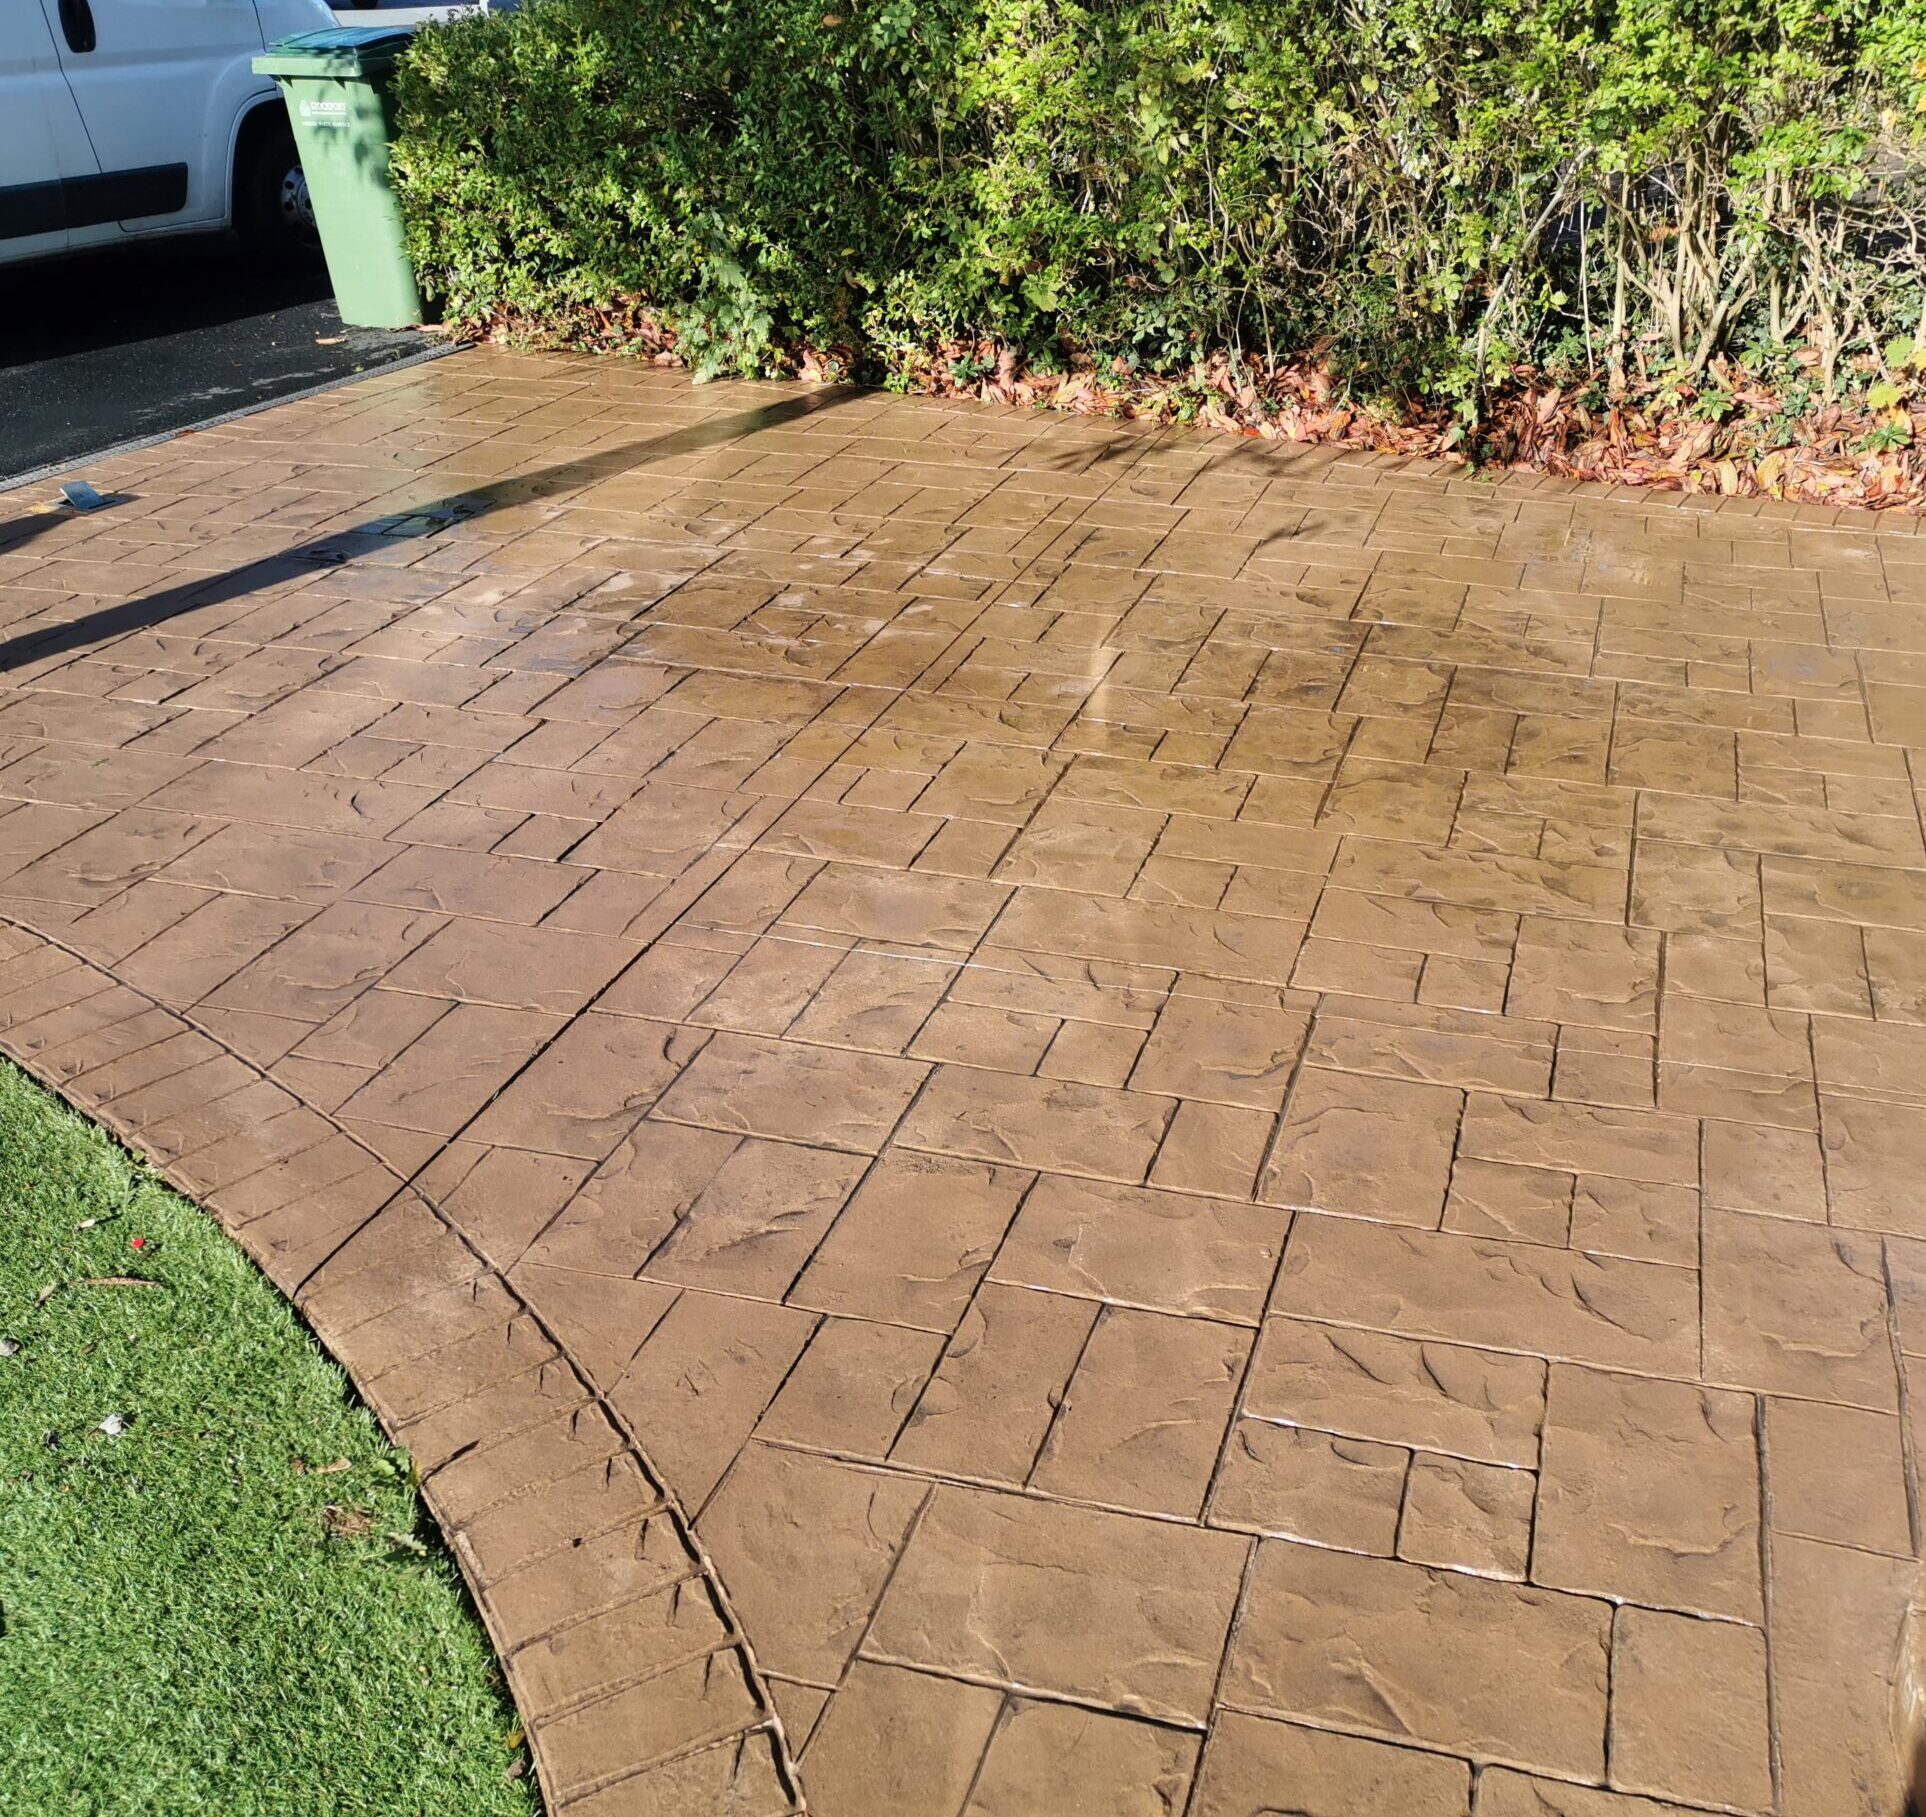 Driveway Cleaning Service Stockport, Outside Cleaning Services, Cleaning Service, Pressure Cleaning, Roof Cleaning, Driveways, Patio, Paths, Upvc Cleaning, Professional And Cheap Cleaning Services, Facade Cleaning, Outside Cleaning, Gutters Cleaning Services, Patio Pressure Cleaning,